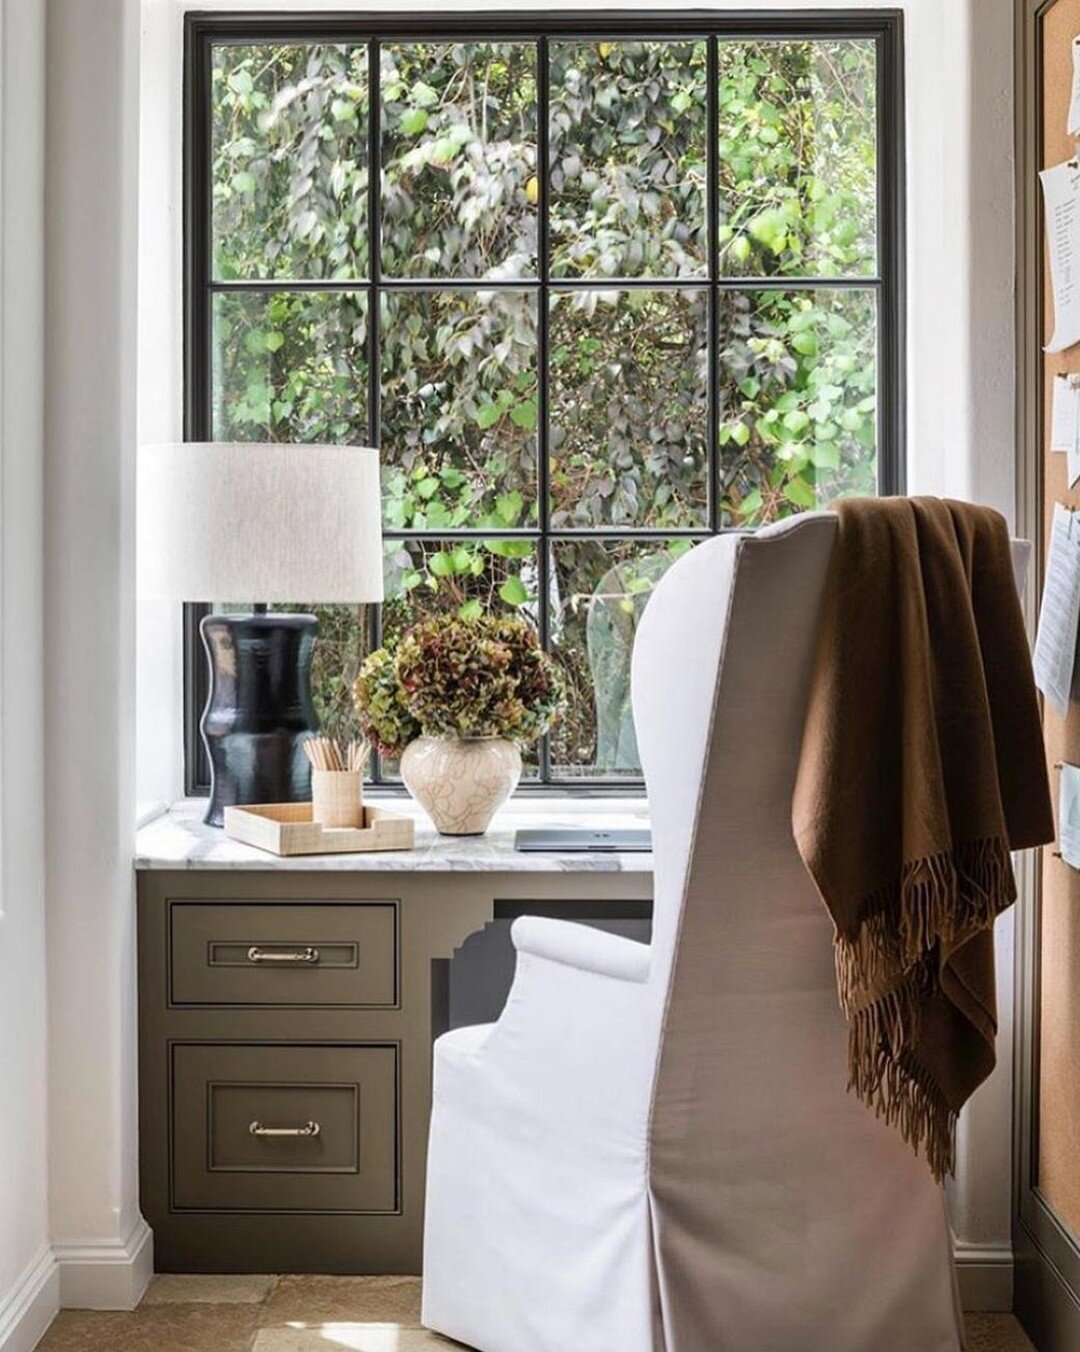 If you&rsquo;re like me, you&rsquo;re in your home office more than most rooms of the house. The right throw blanket, right lighting, etc. can make a world of difference. ⁠
⁠
I appreciate that @scoutandnimble is sharing all these great spaces (design